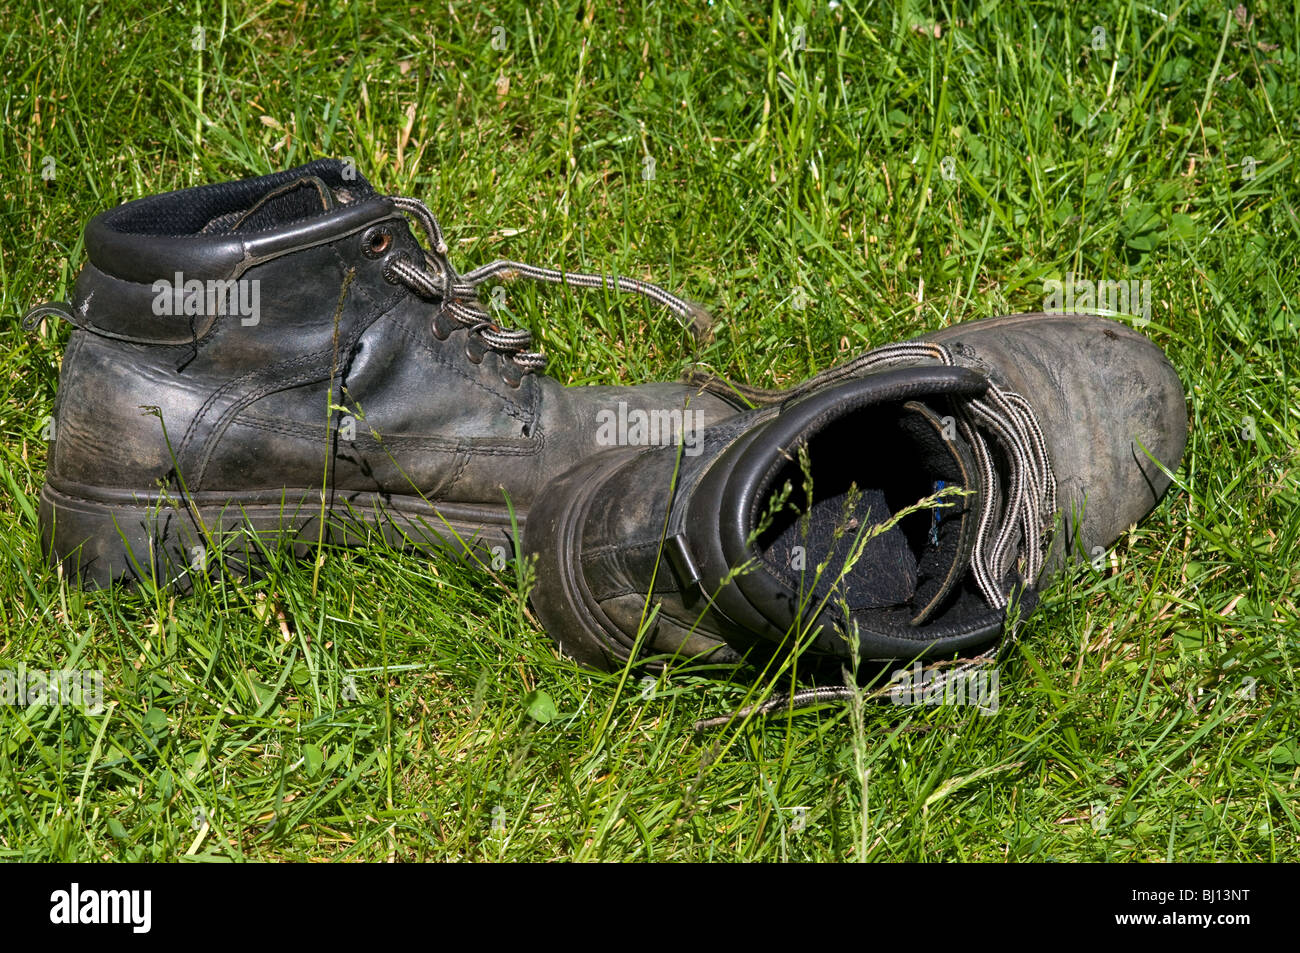 Workboots High Resolution Stock Photography and Images - Alamy